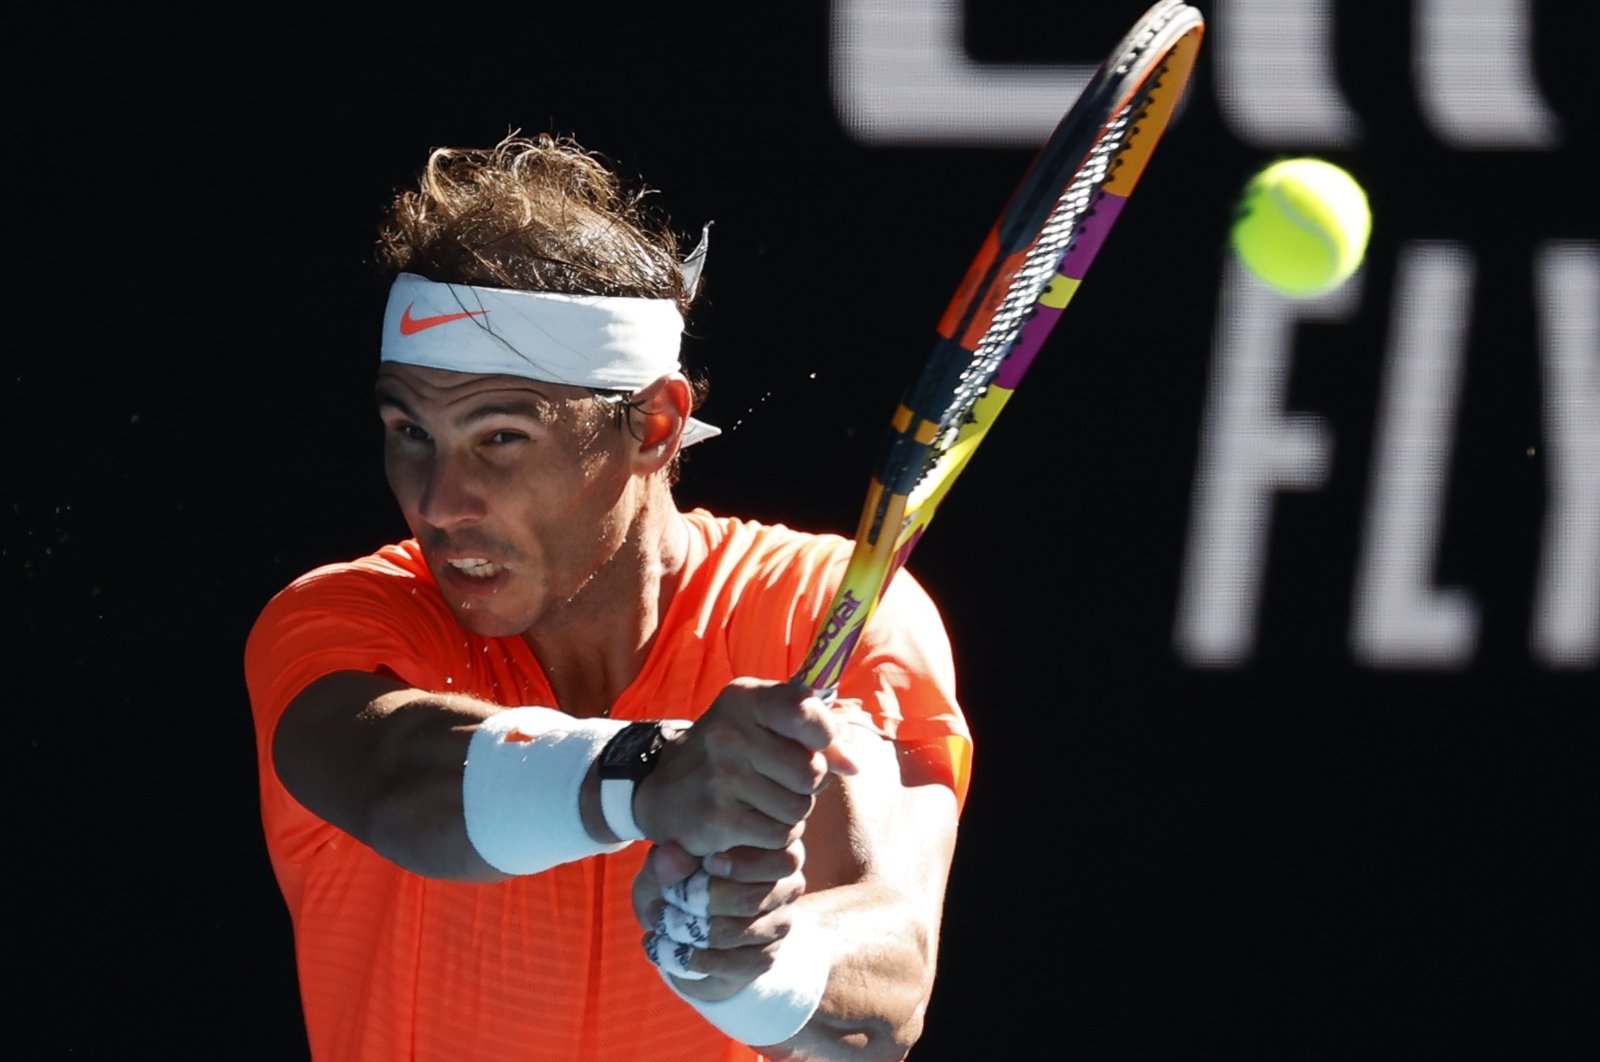 Spain's Rafael Nadal makes a backhand return to Serbia's Laslo Djere during their first-round match at the Australian Open, in Melbourne, Australia, Feb. 9, 2021. (AP Photo)